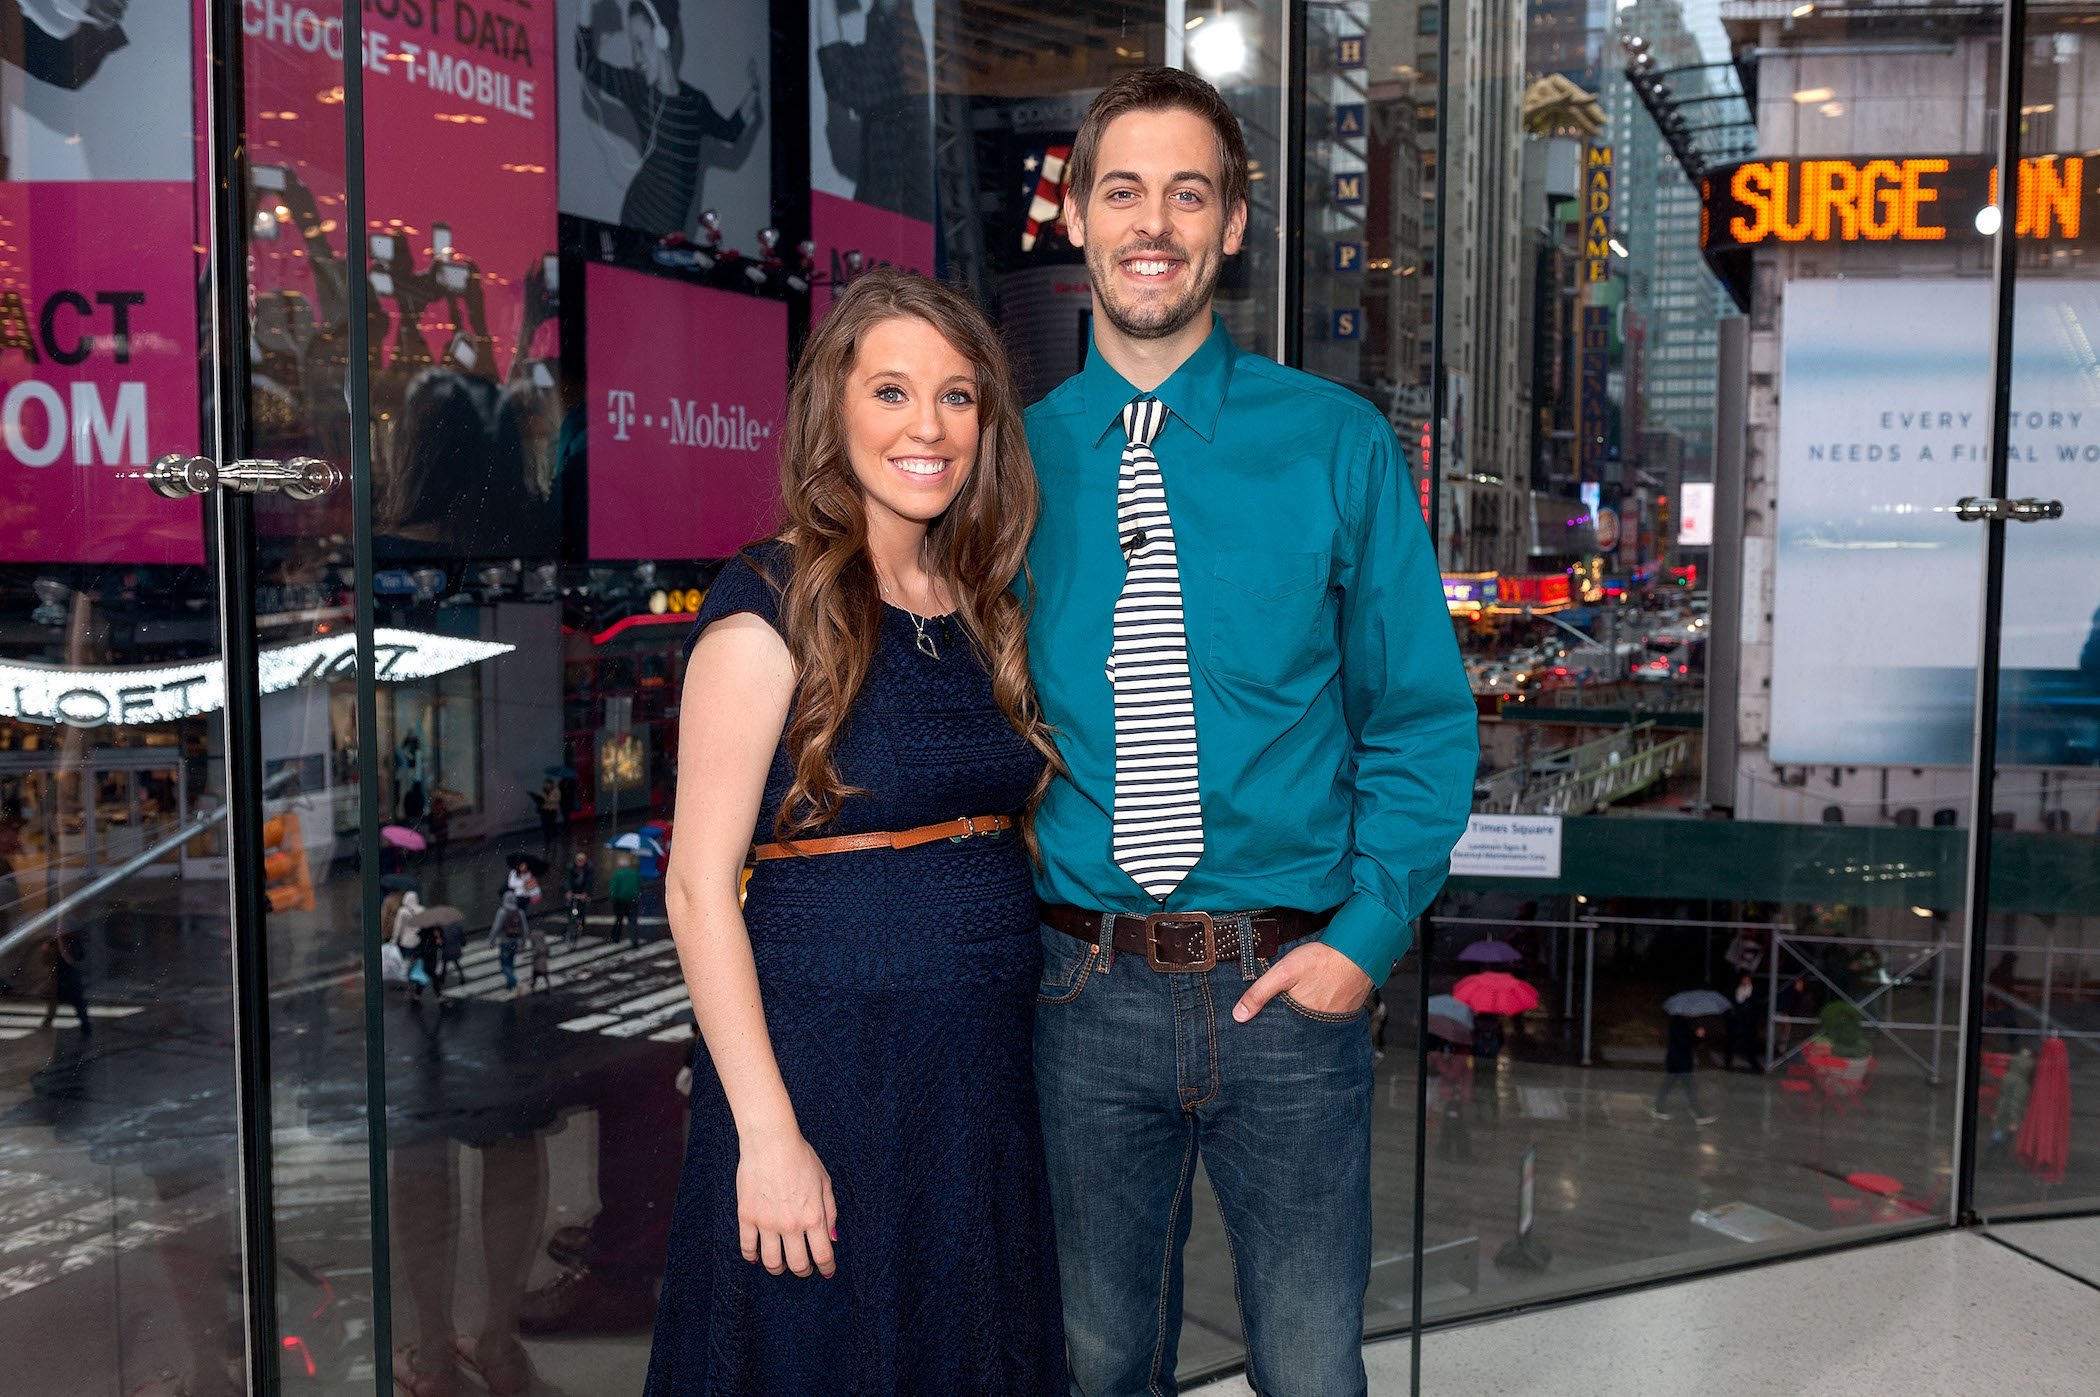 Jill Duggar and Derick Dillard of the Duggar family smiling with their arms around each other